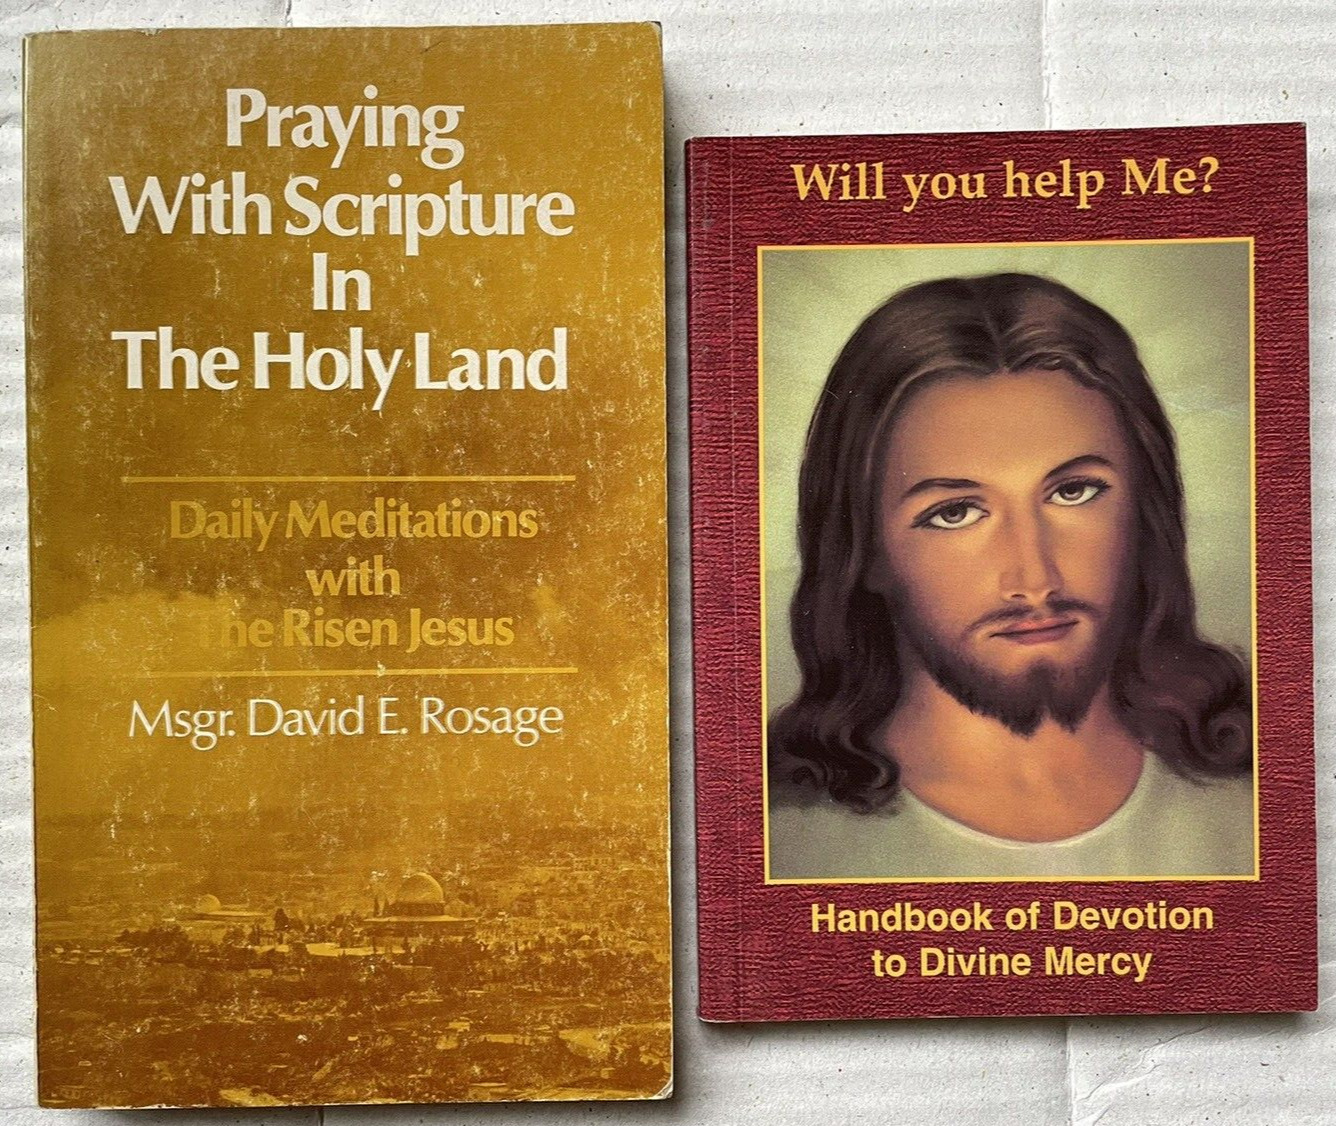 Handbook of Devotion to Divine Mercy & Praying w/ Scripture in the Holy Land